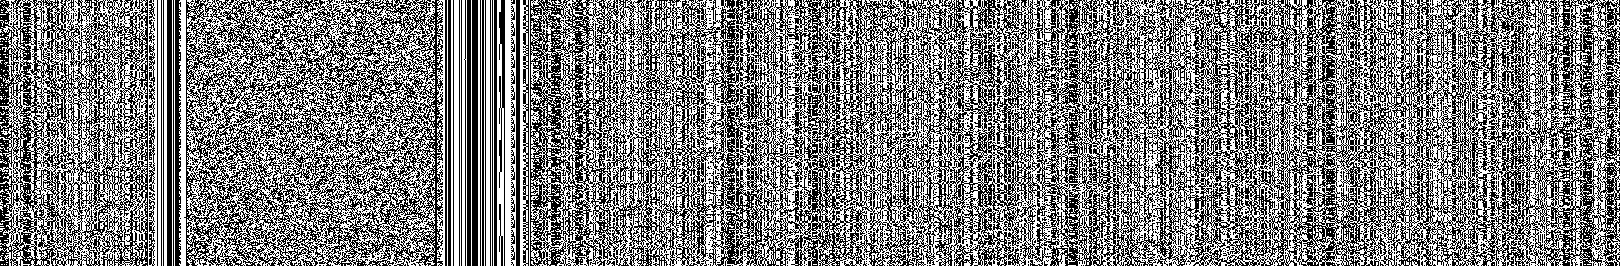 Bitview of Unsynchronized CCSDS Frames.